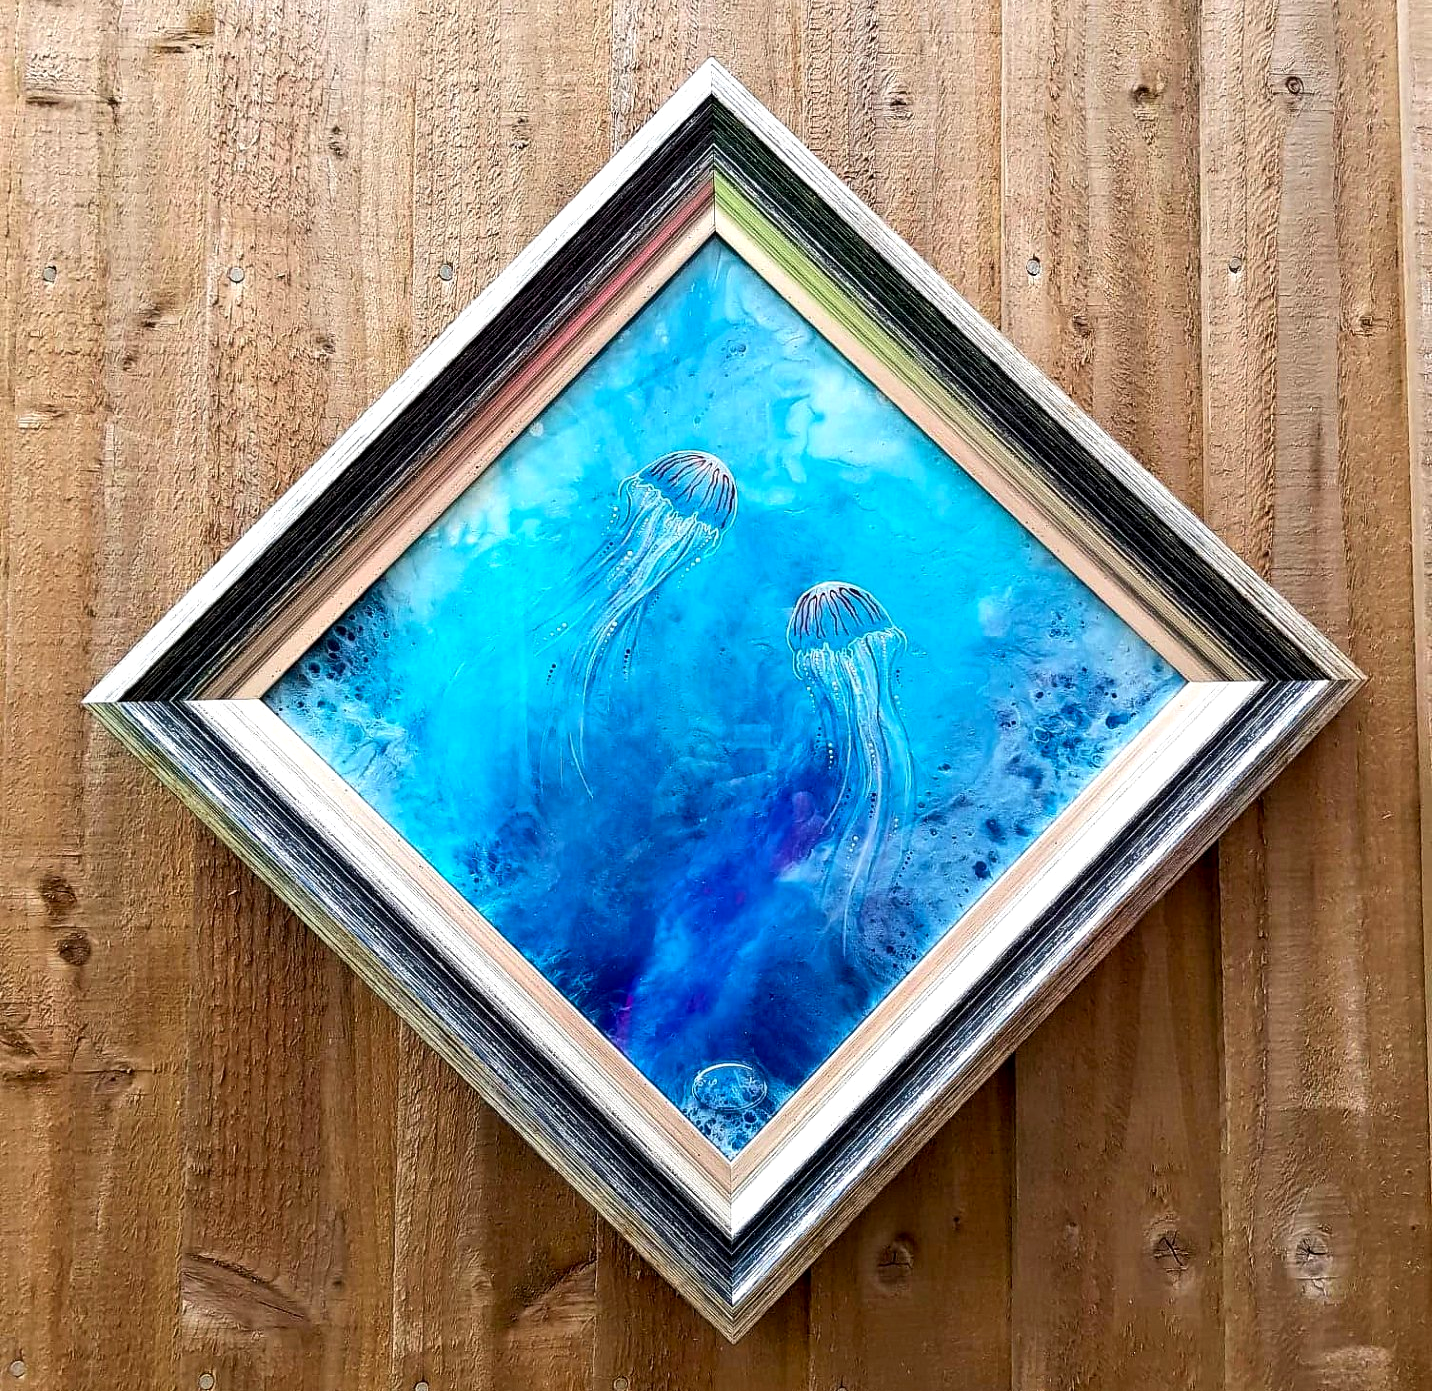 Medusa Duet, jellyfish painted onto resin, original piece, framed and ready to hang